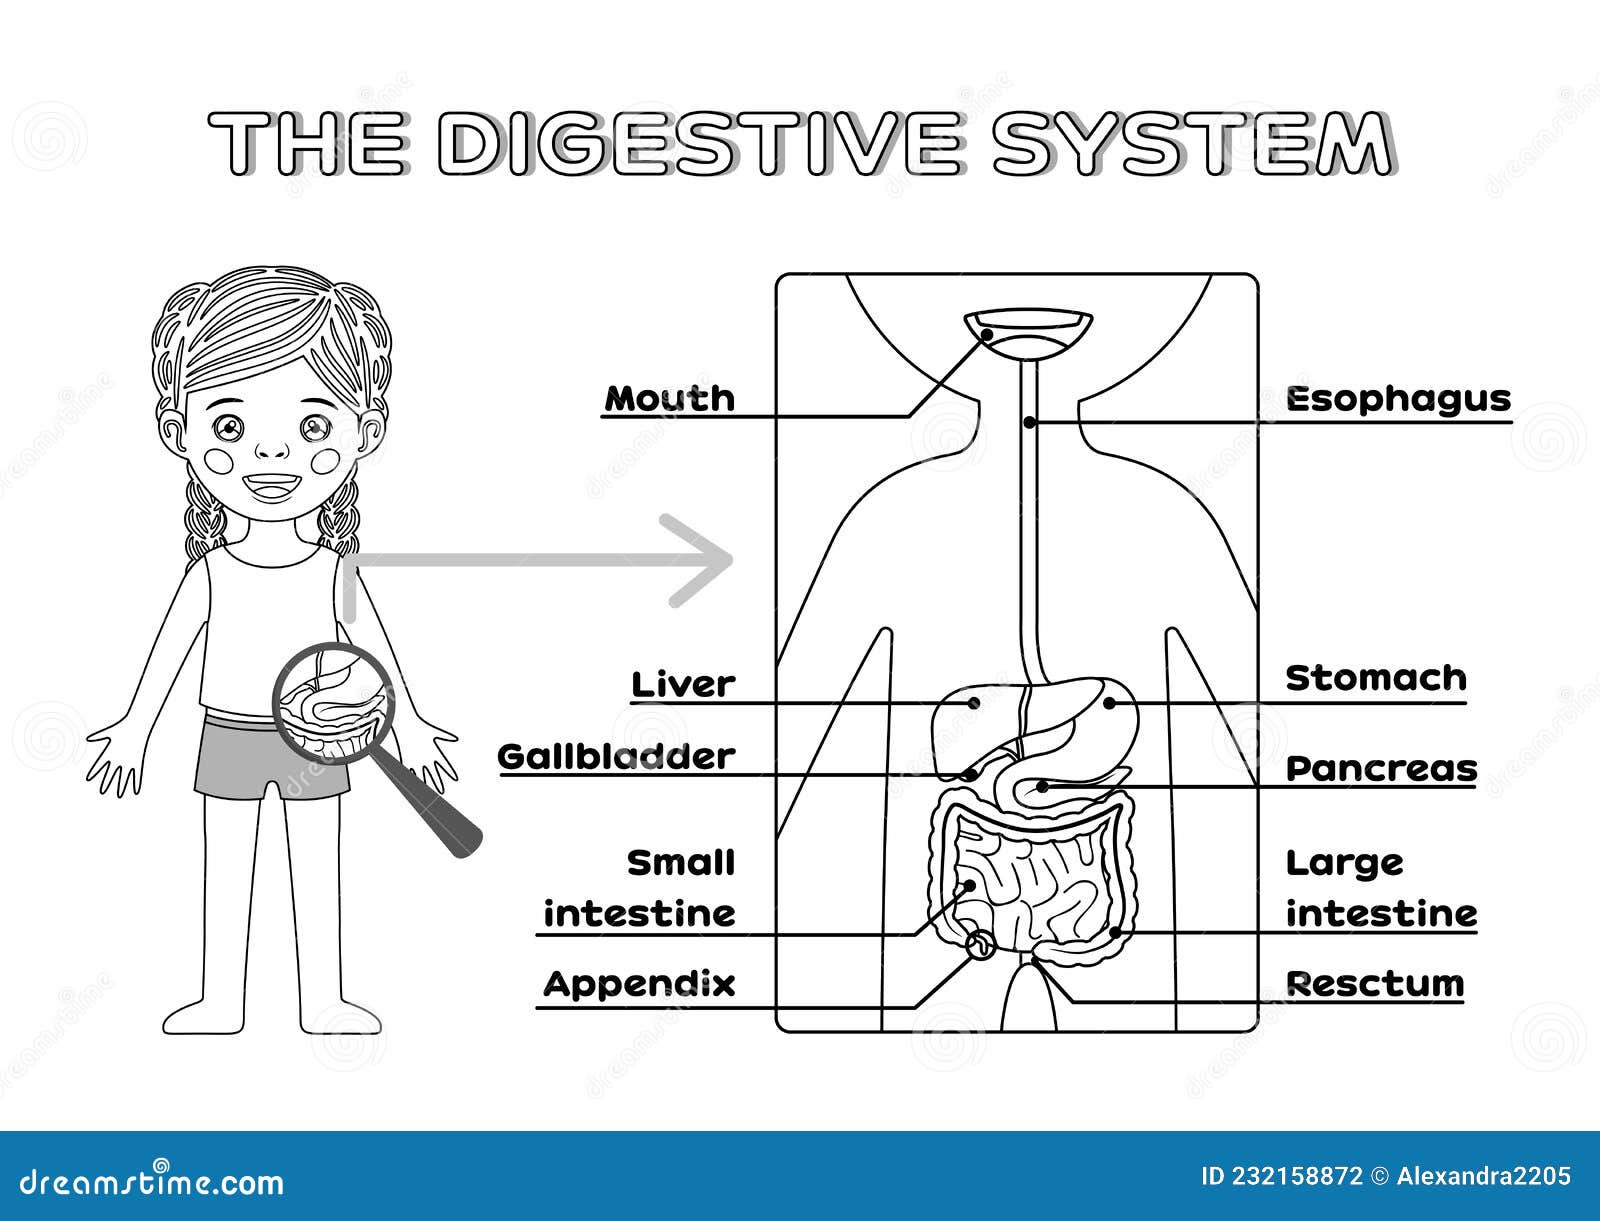 Digestive System Diagram | Study Guides, Projects, Research Human Biology |  Docsity